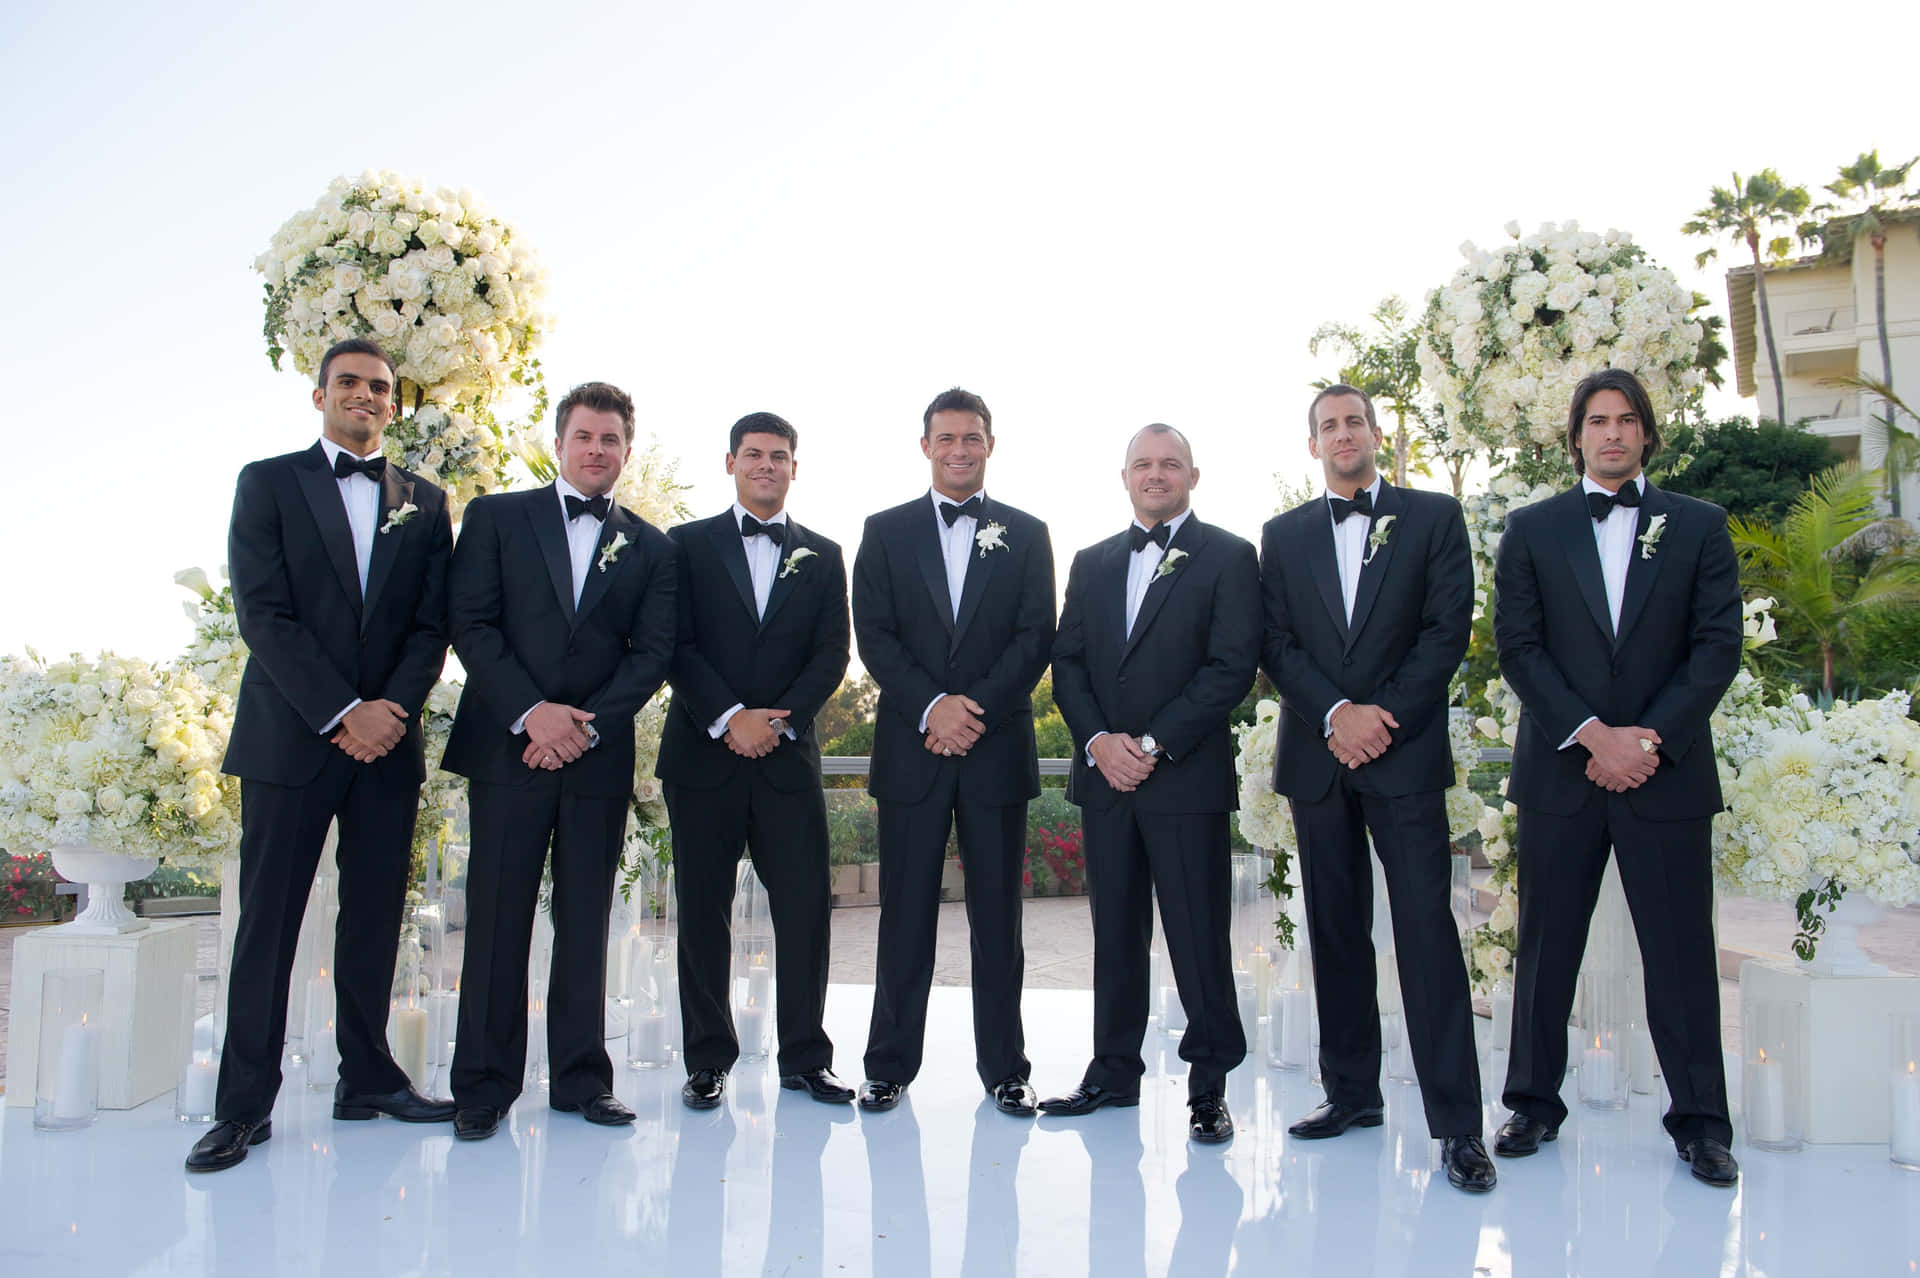 A group of five dressed up groomsmen posing together at a wedding.